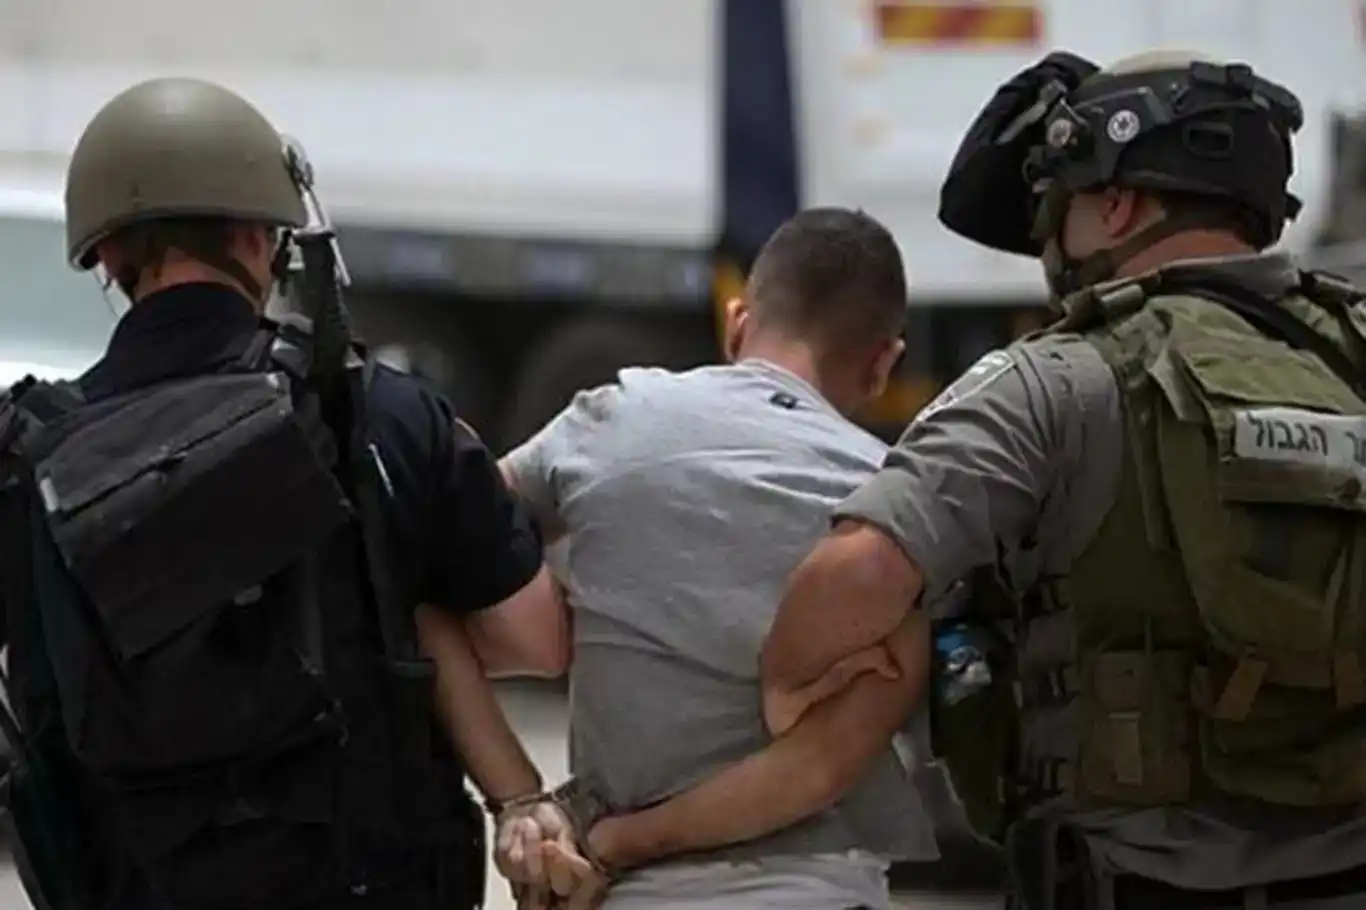 Over 9,800 Palestinians detained in occupied West Bank since October 7